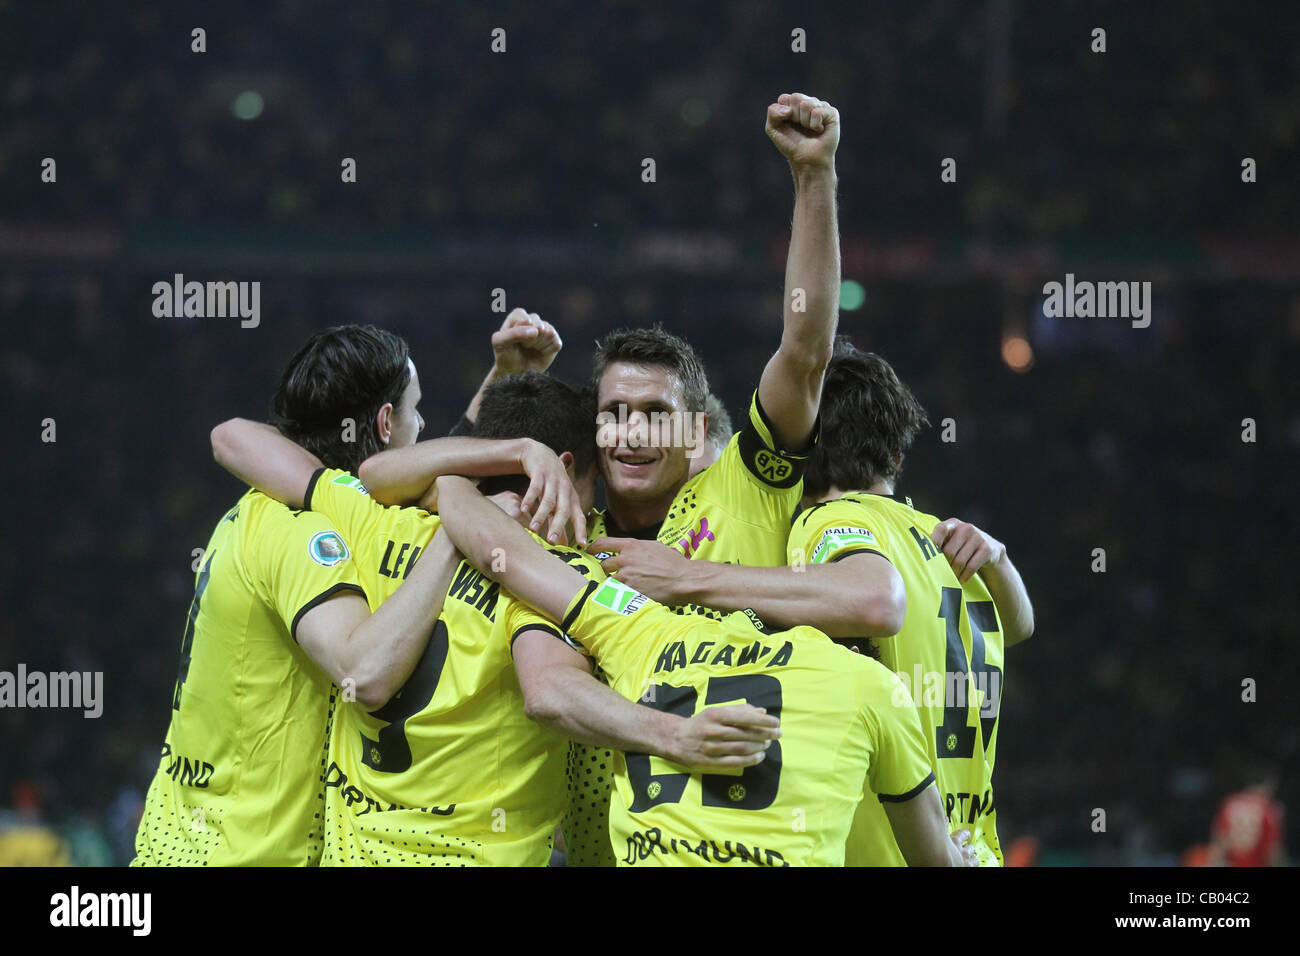 12.05.2012. Berlin Olympic Stadium, Germany.  Dortmund's Sebastian Kehl(facing) celebrates with his teammates during the German DFB Cup final soccer match between Borussia Dortmund and FC Bayern Munich at the Olympic Stadium in Berlin, Germany Stock Photo